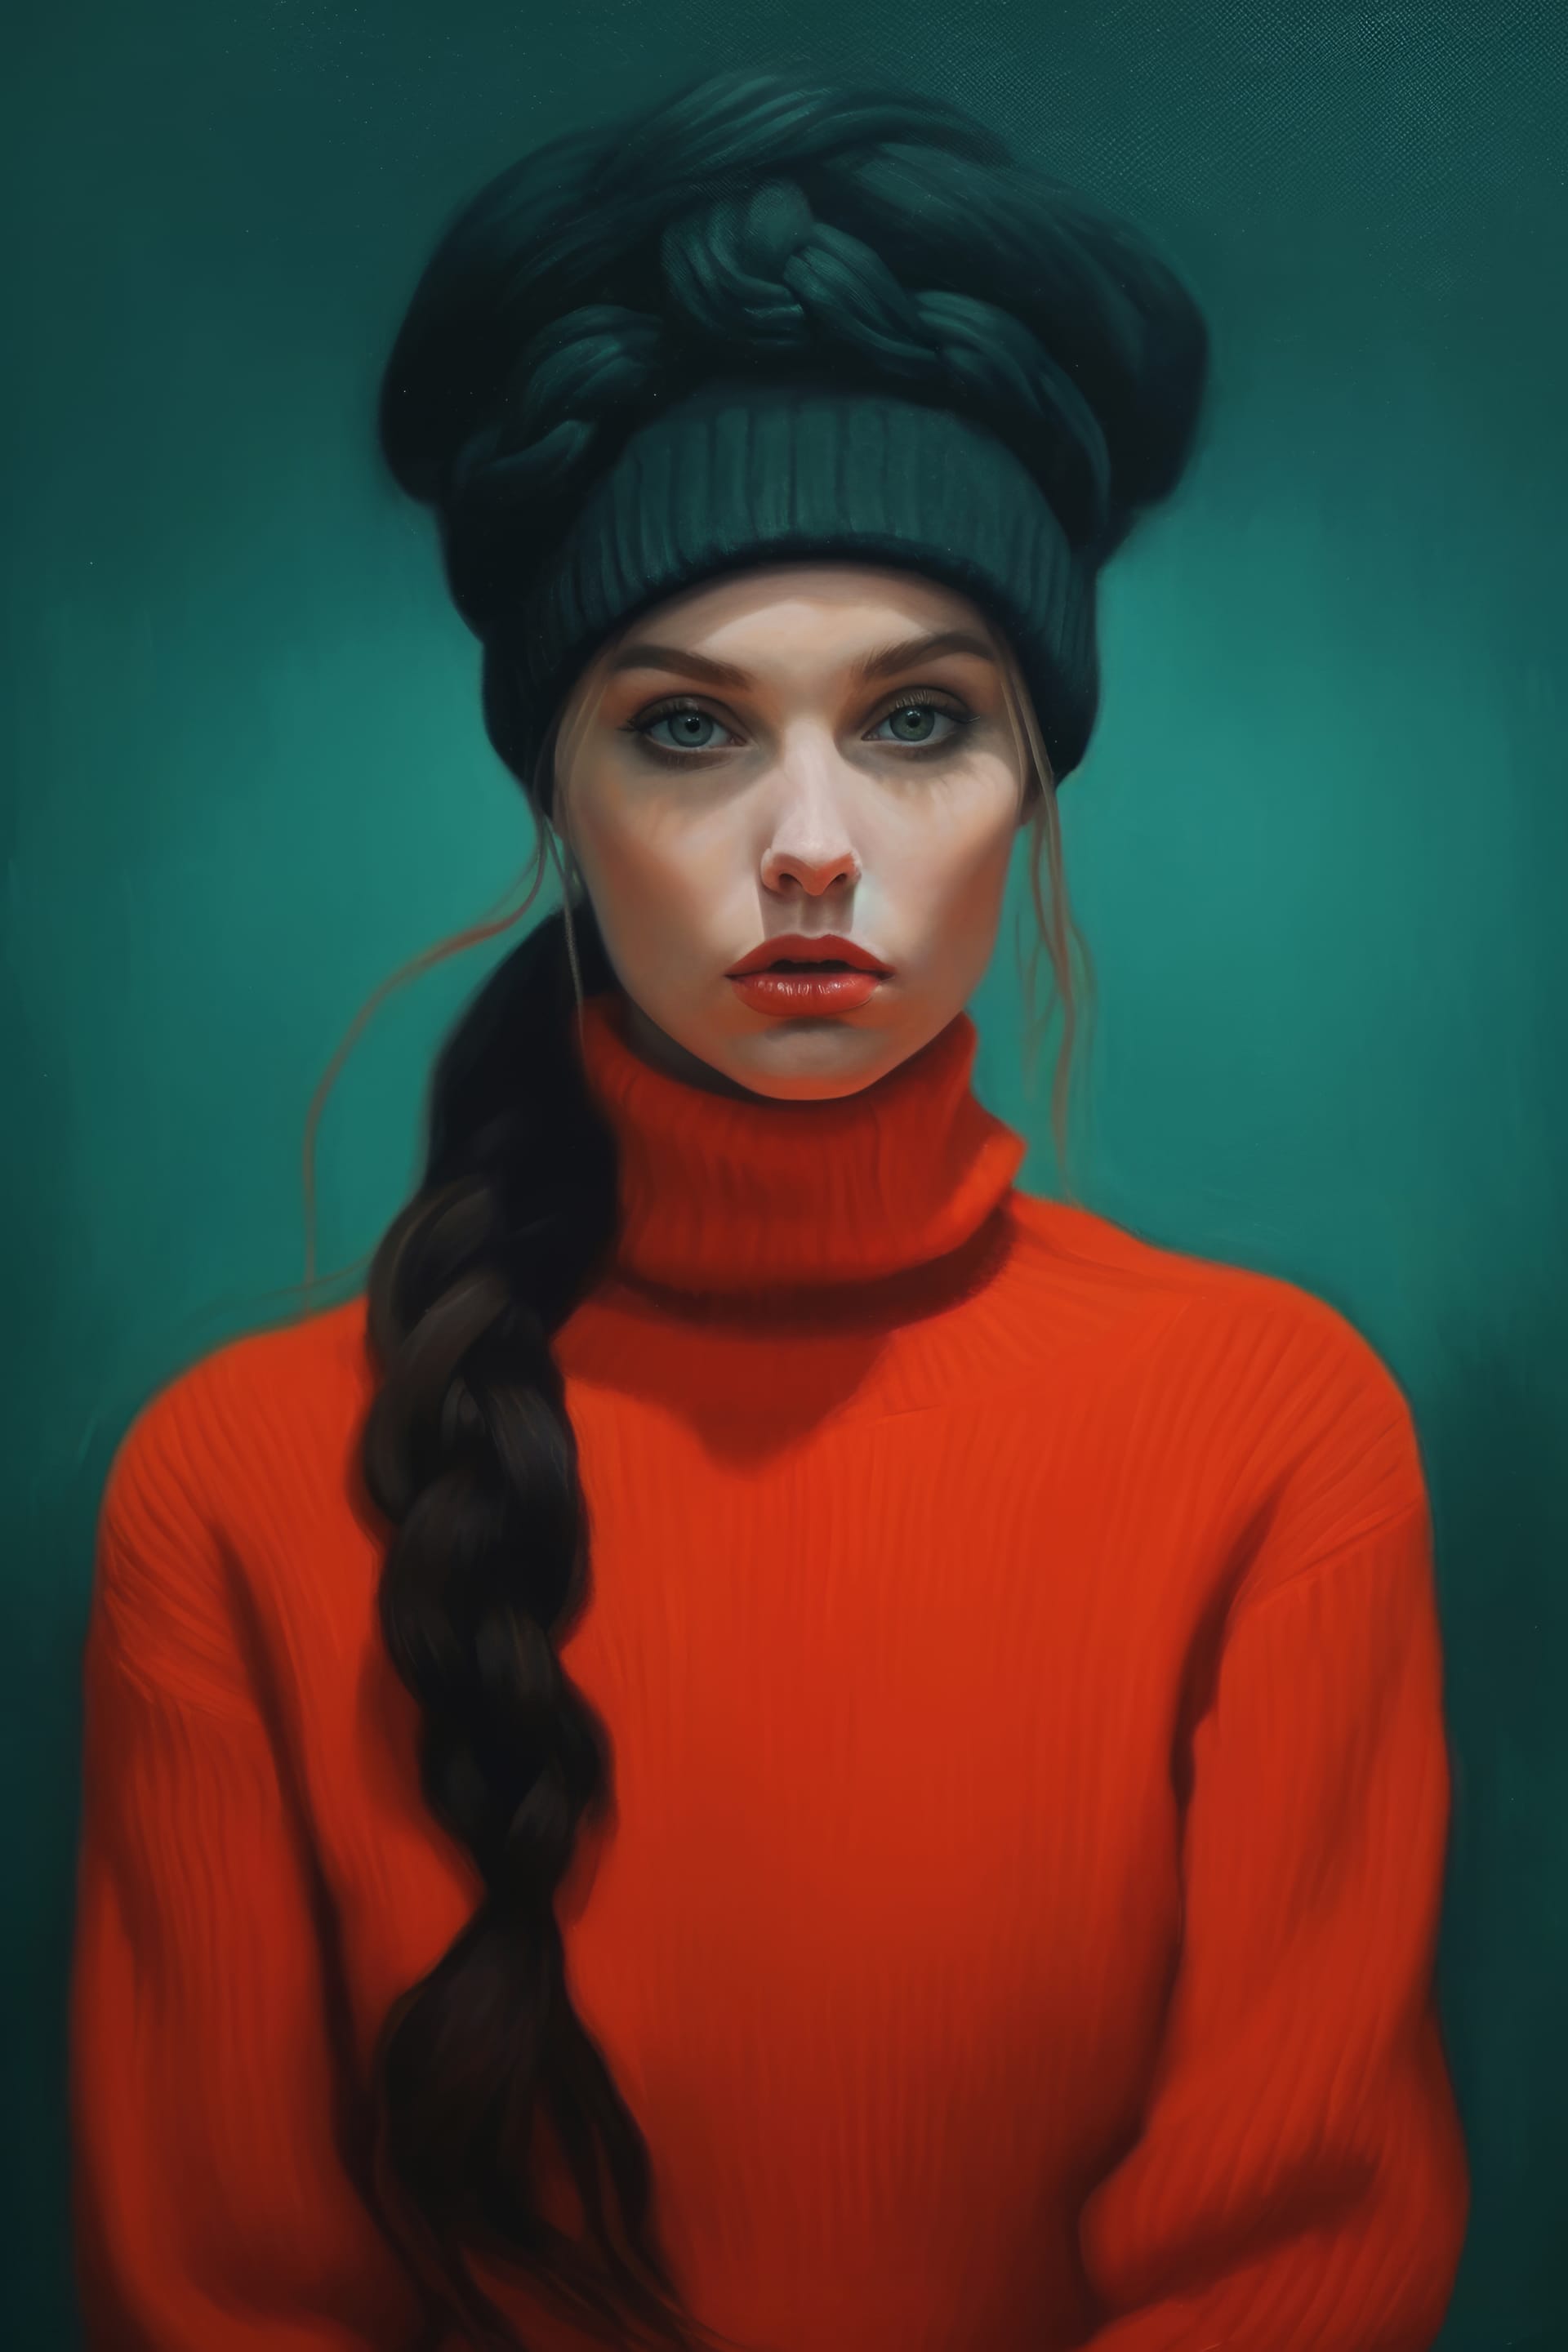 Painting woman with orange sweater evocative artwork portraiture